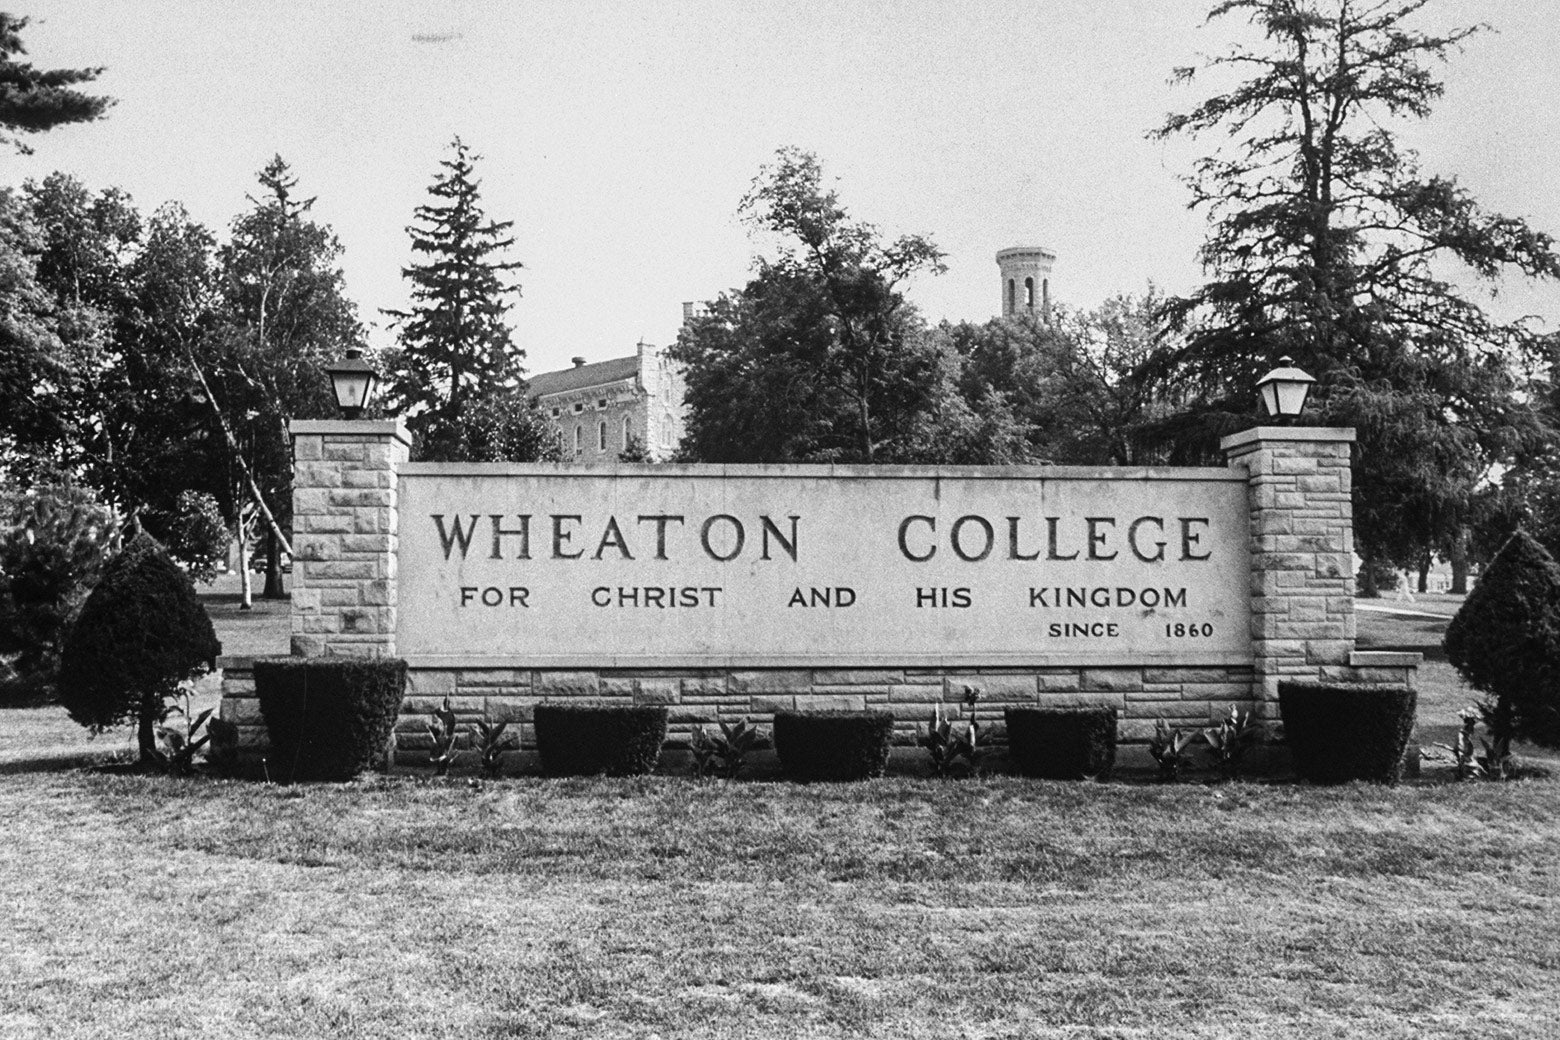 A sign for Wheaton College, which reads "Wheaton College for christ and his kingdom since 1860."